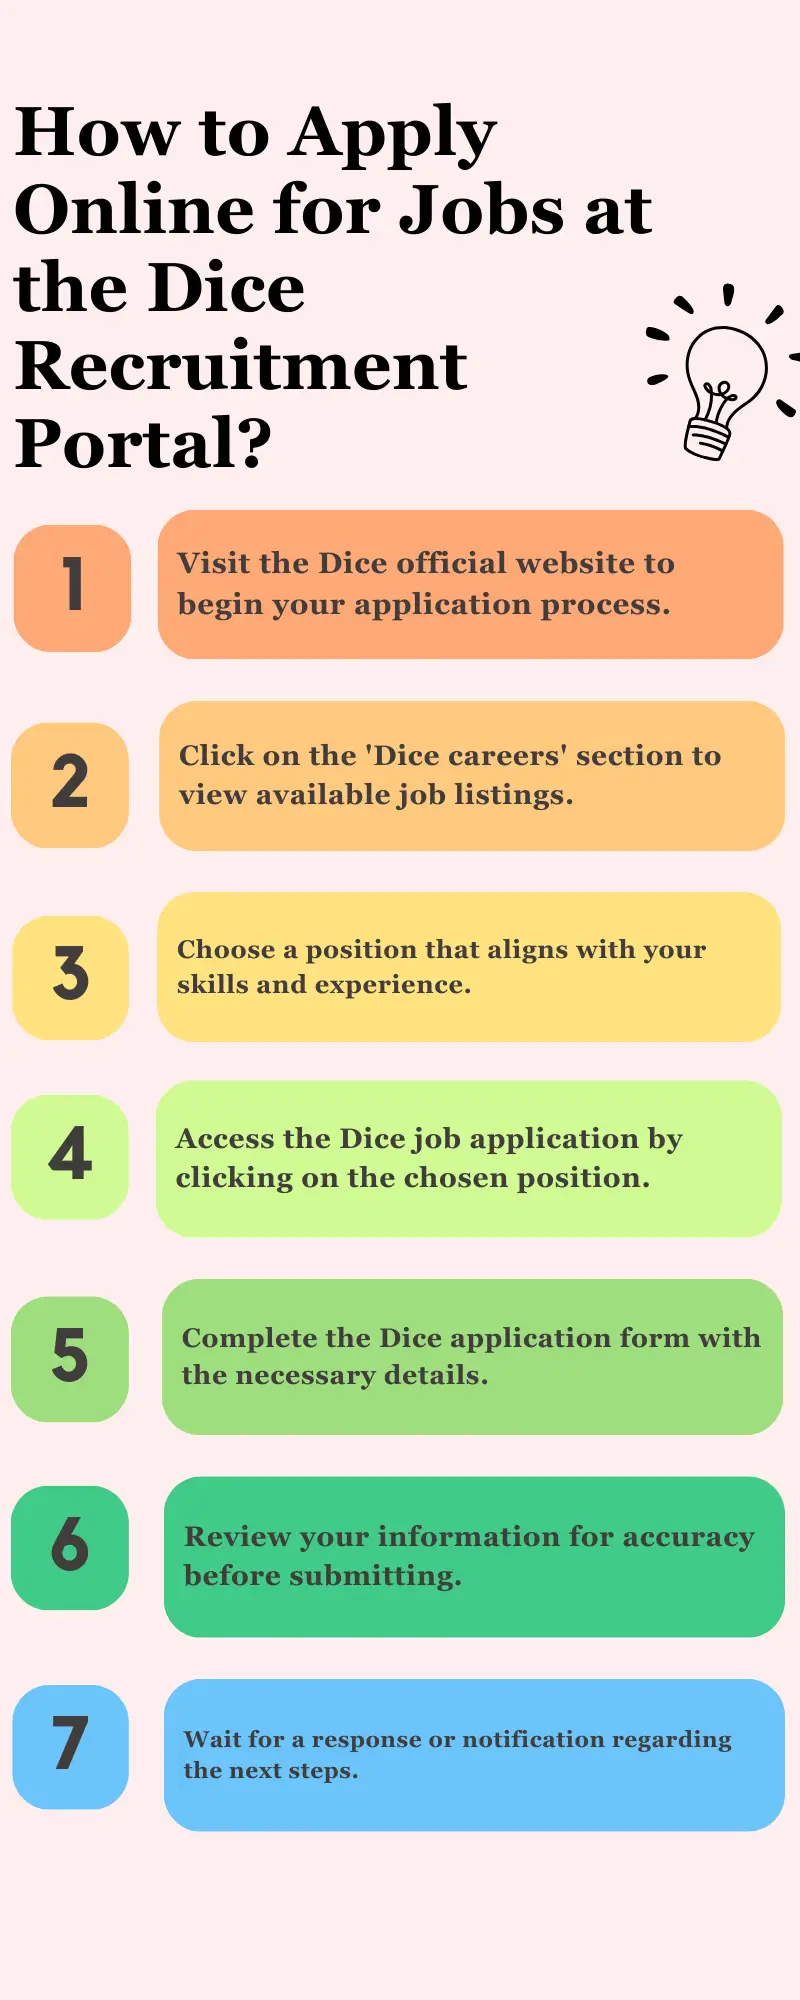 How to Apply Online for Jobs at the Dice Recruitment Portal?